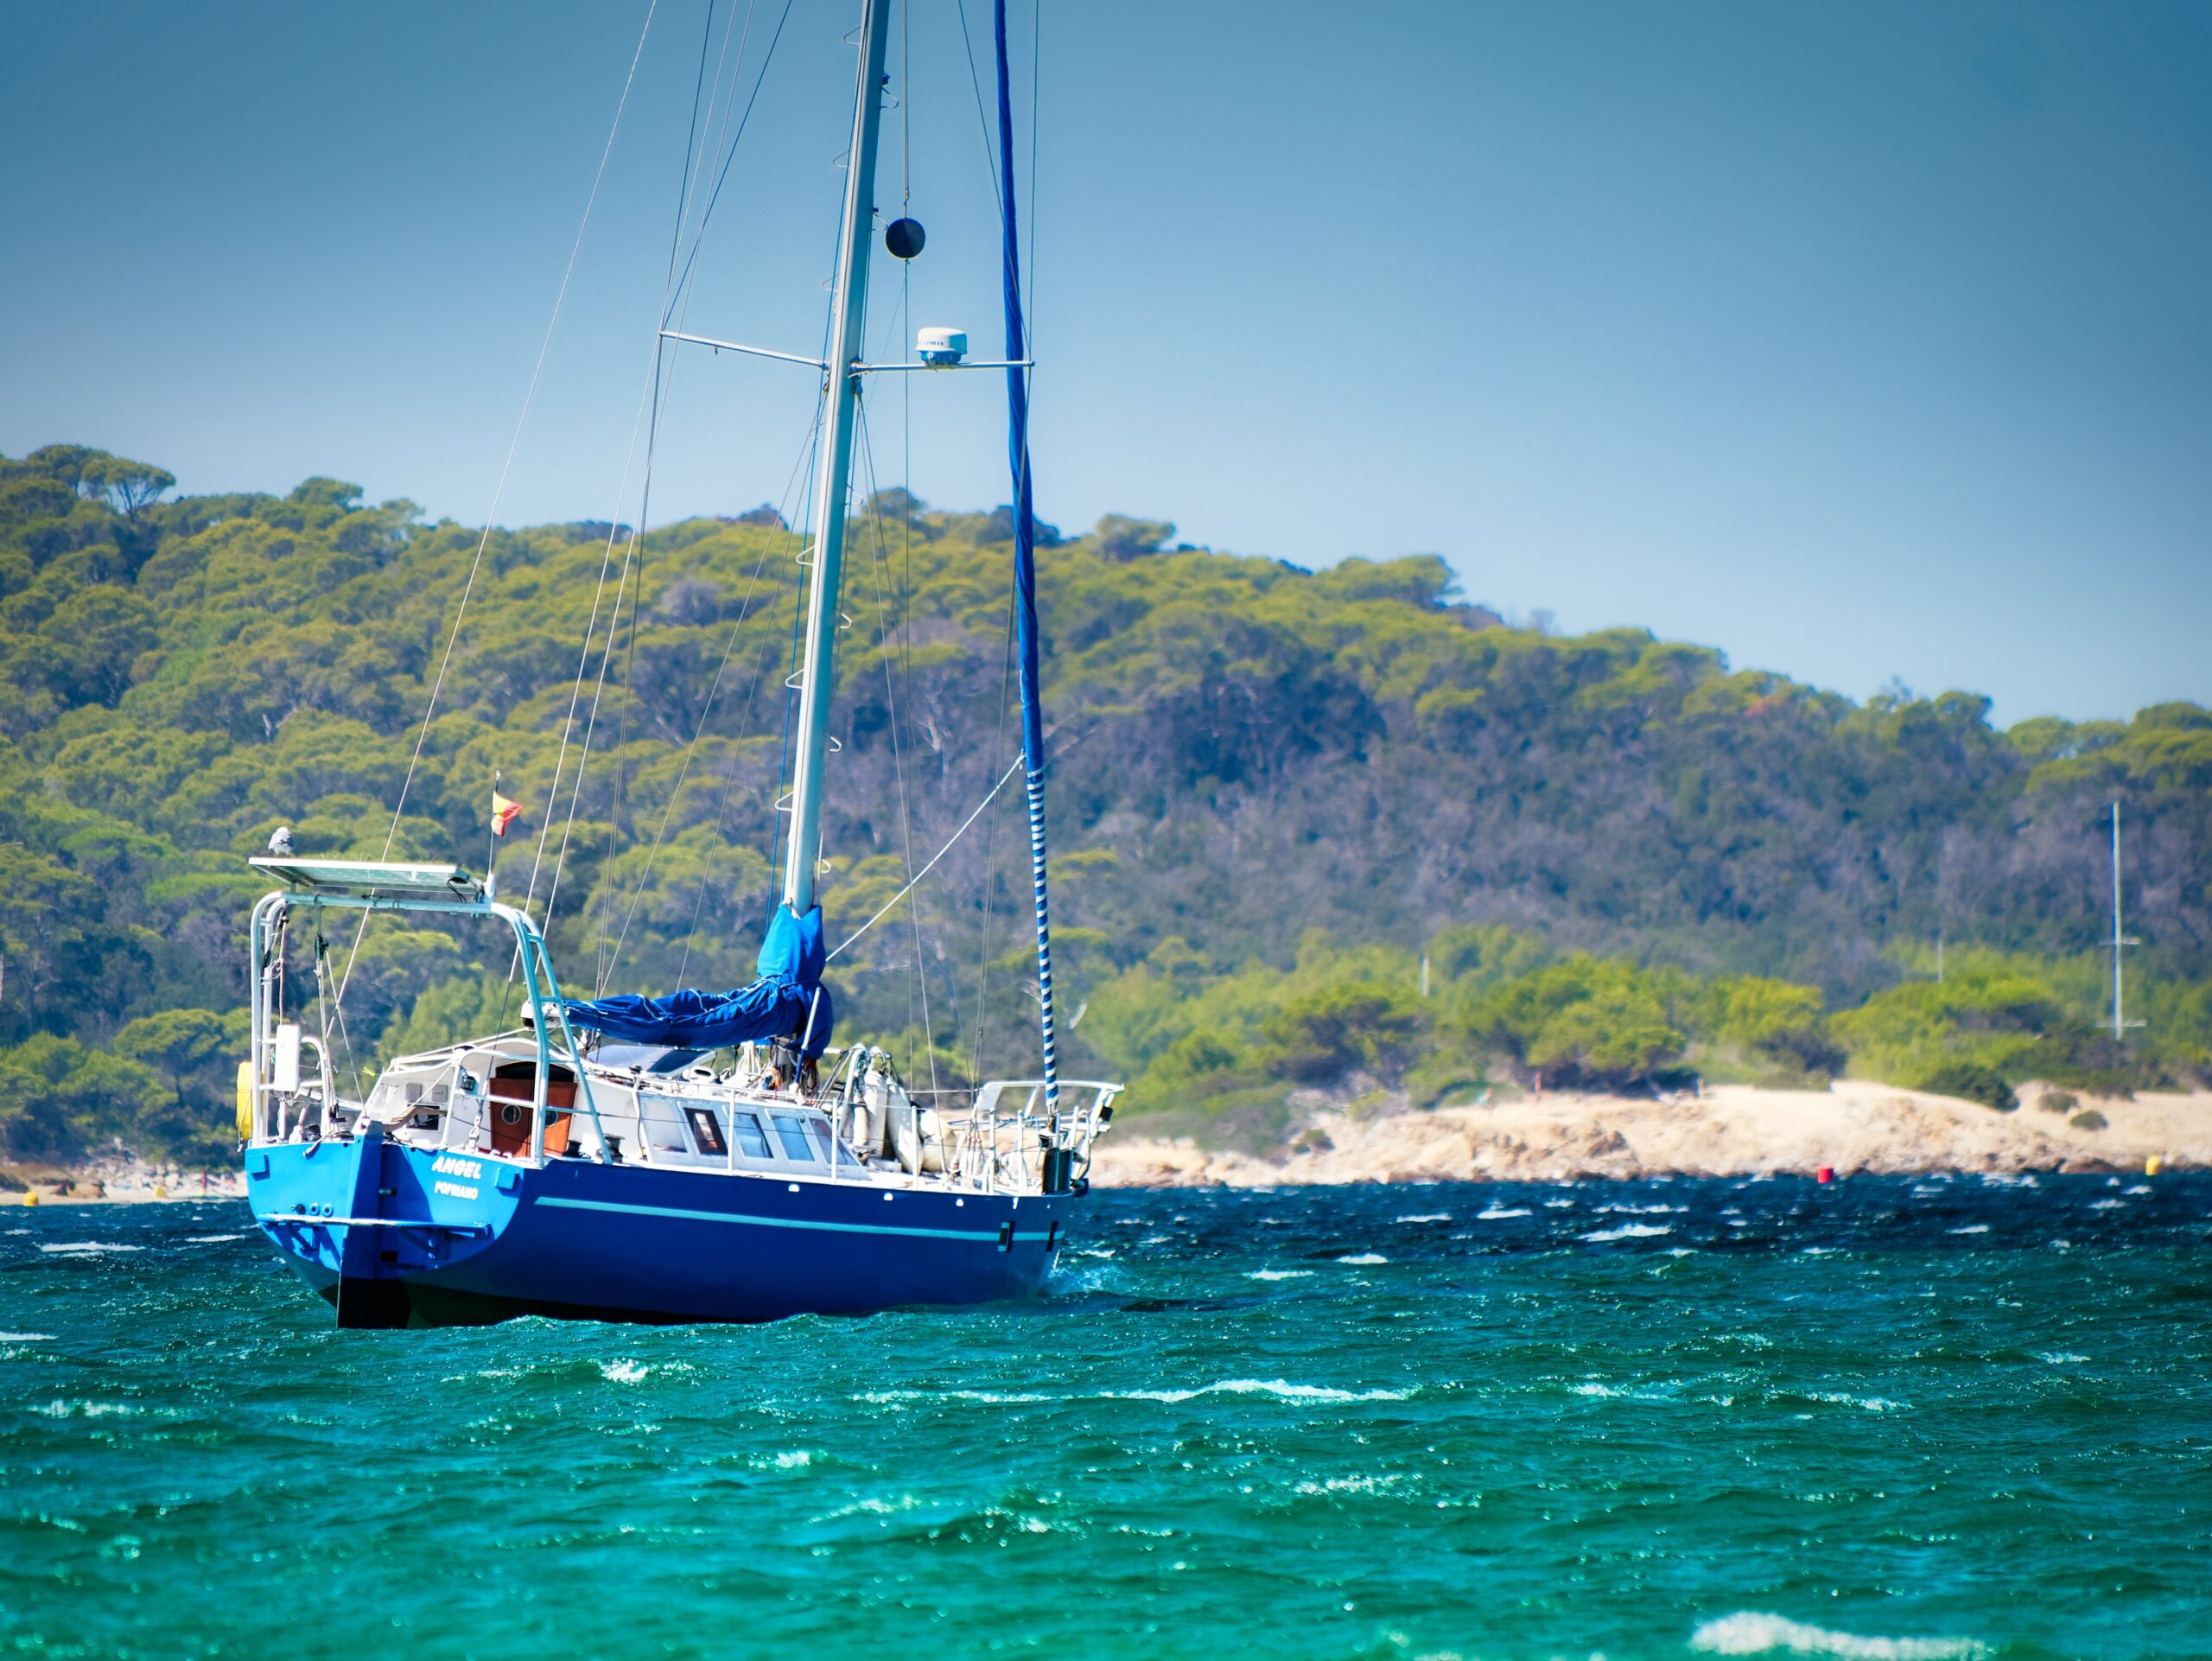 Porquerolles is a coastal area off the southern coast of France.
Pictured: A boat sailing near the shores of Porquerolles 